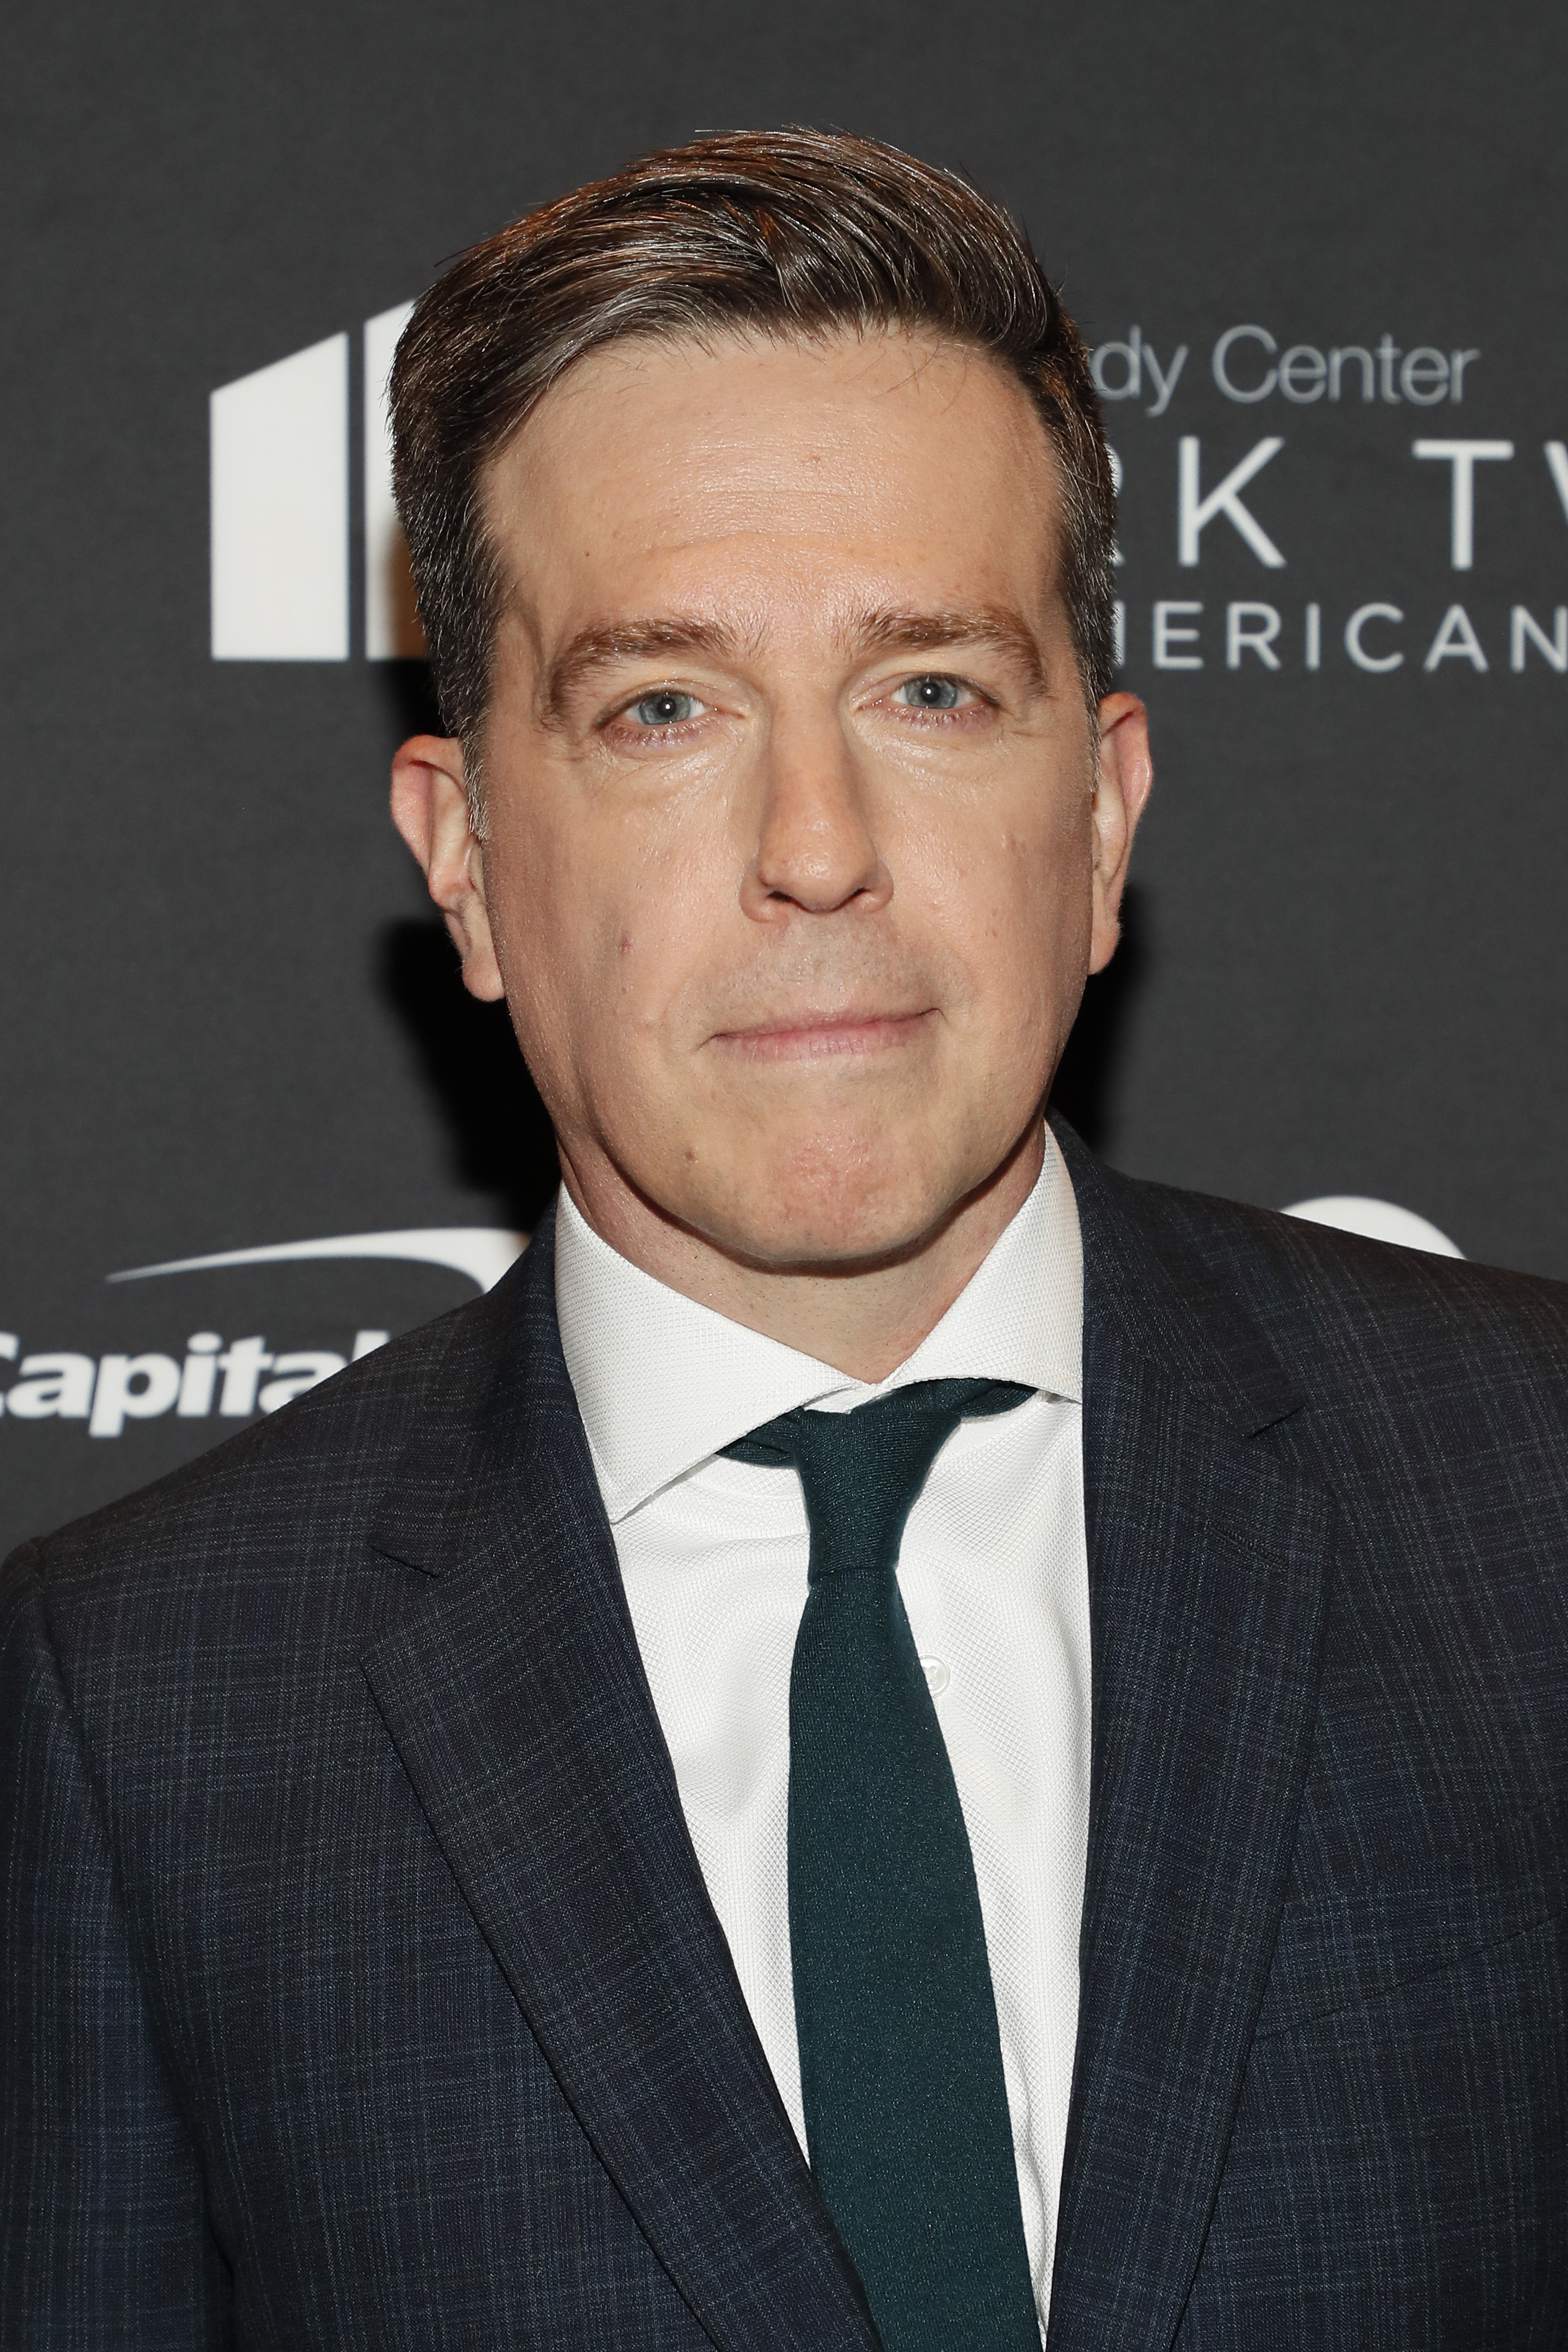 Ed Helms at the 23rd Annual Mark Twain Prize For American Humor on April 24, 2022. in Washington, DC. | Source: Getty Images